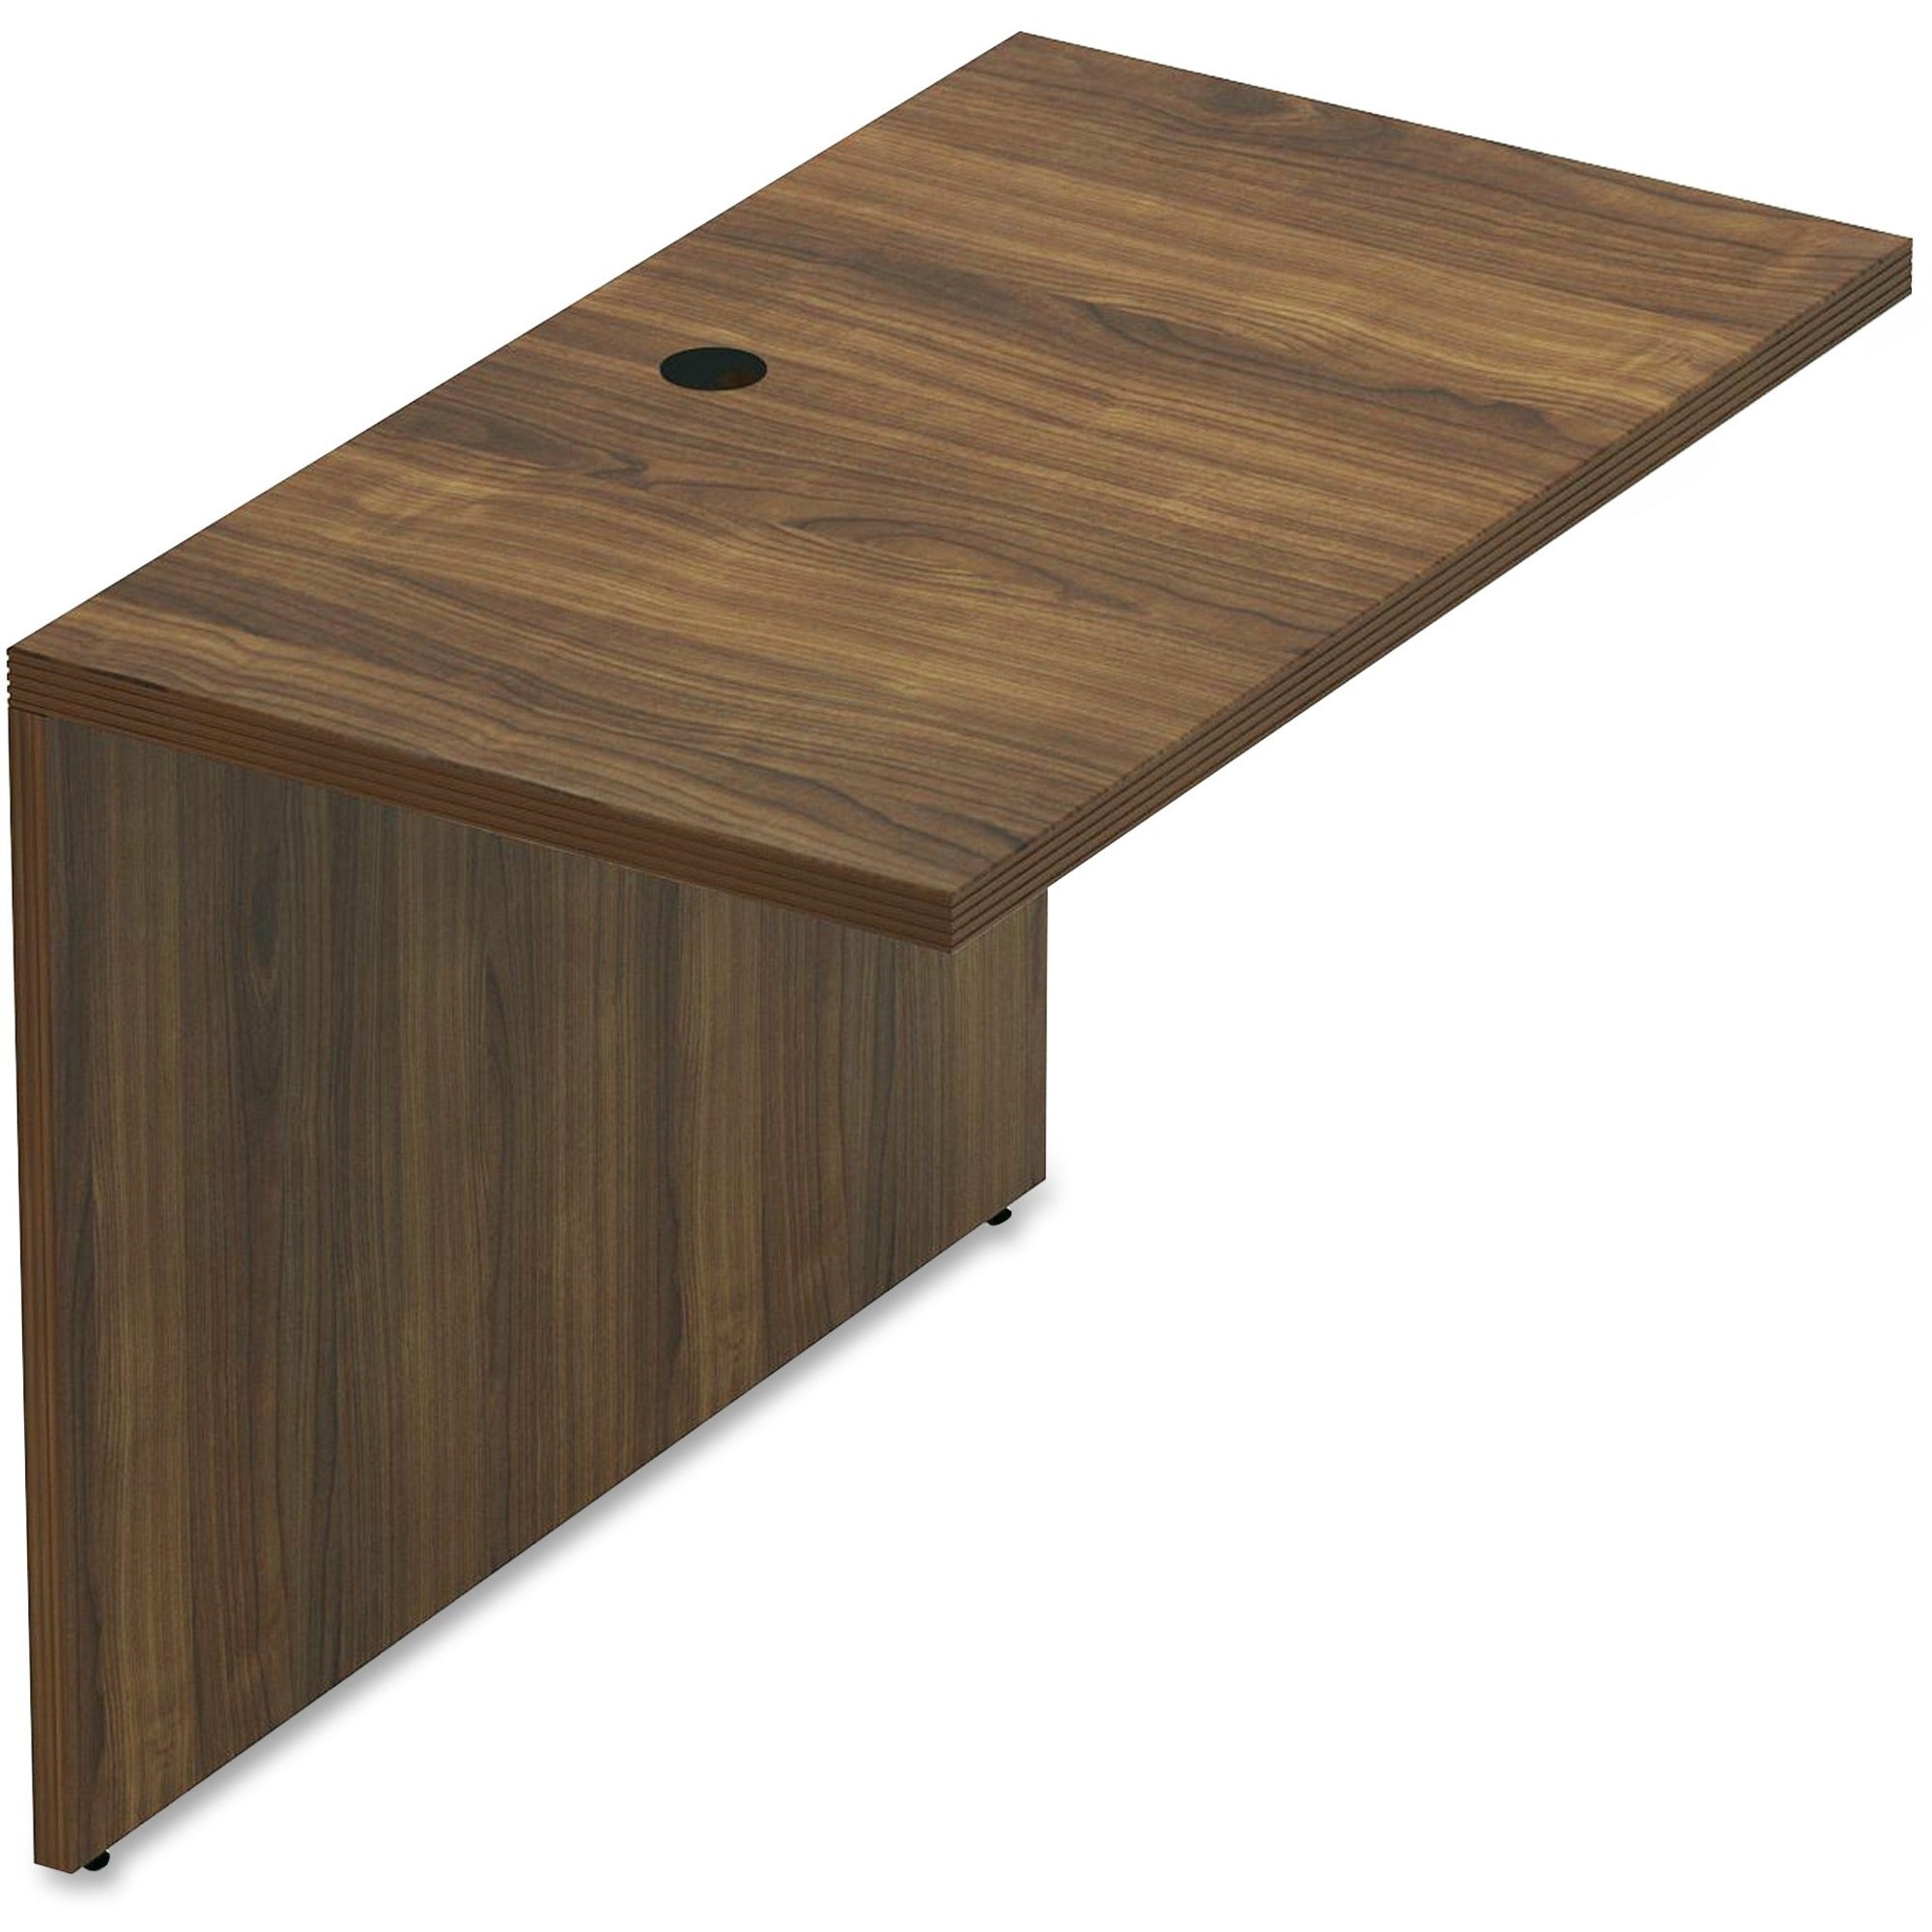 Lorell Chateau Series Bridge - 41.4" x 23.6"30" Bridge, 1.5" Top - Reeded Edge - Material: P2 Particleboard - Finish: Walnut, Laminate - Durable, Grommet, Modesty Panel, Cord Management - For Office - 